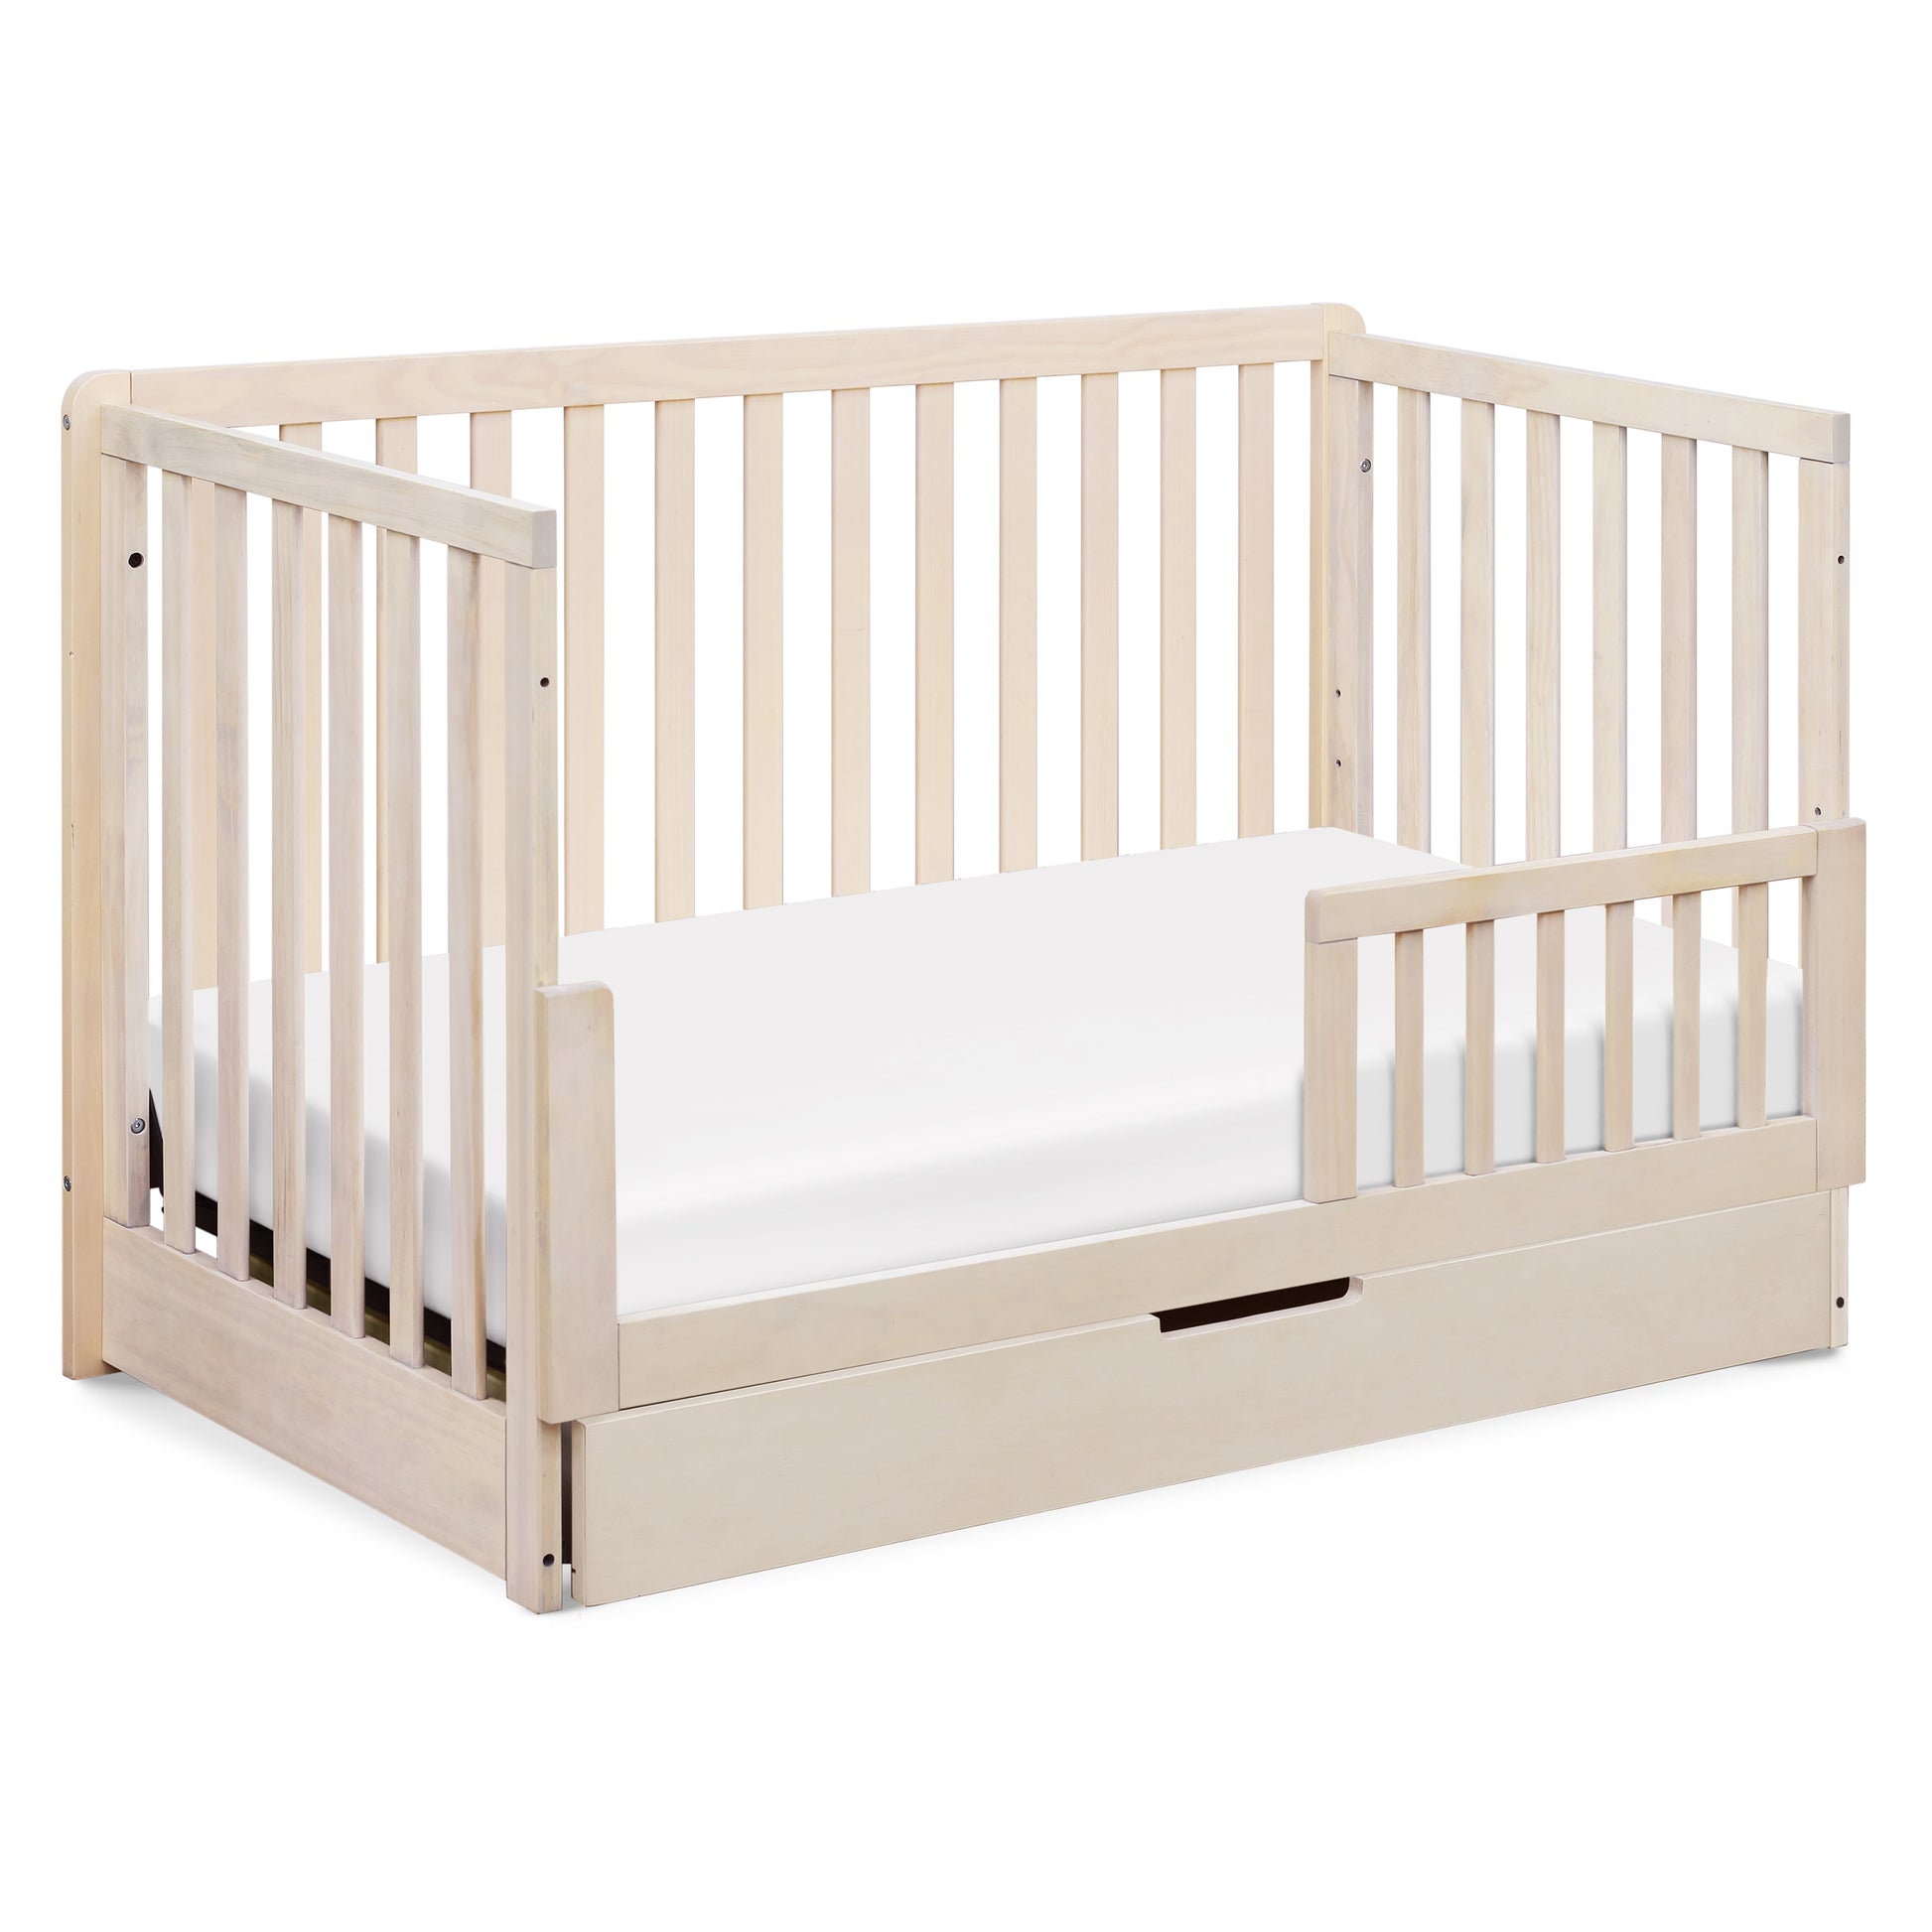 F11951NX,Colby 4-in-1 Convertible Crib w/ Trundle Drawer in Washed Natural